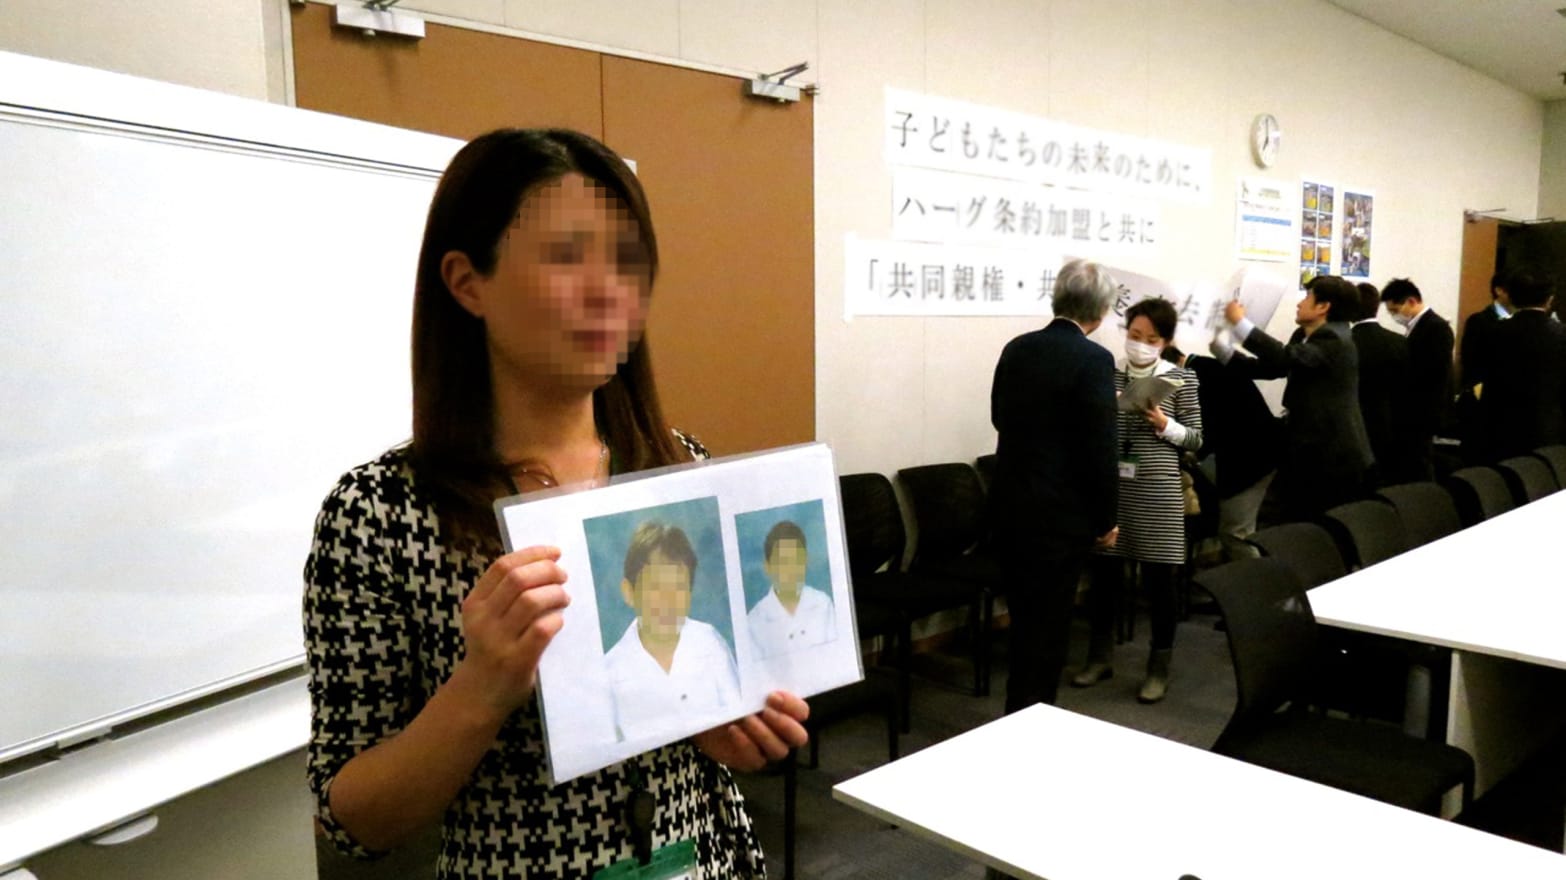 Japan's Child Kidnapping Problem